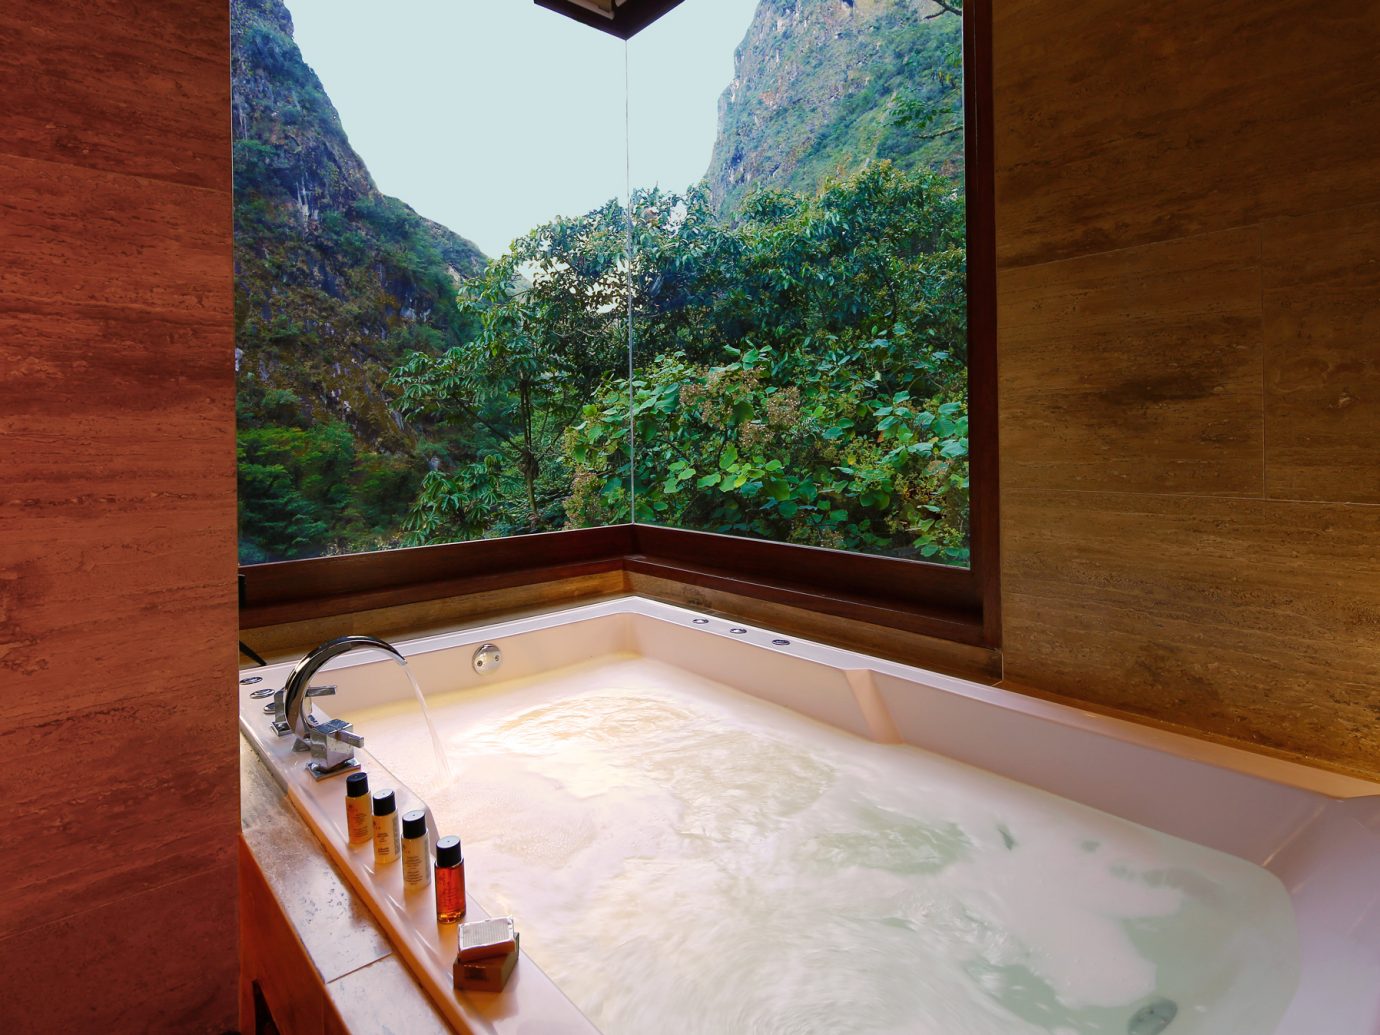 Luxurious bathtub in the imperial suite at SUMAQ overlooking lush Peruvian mountains